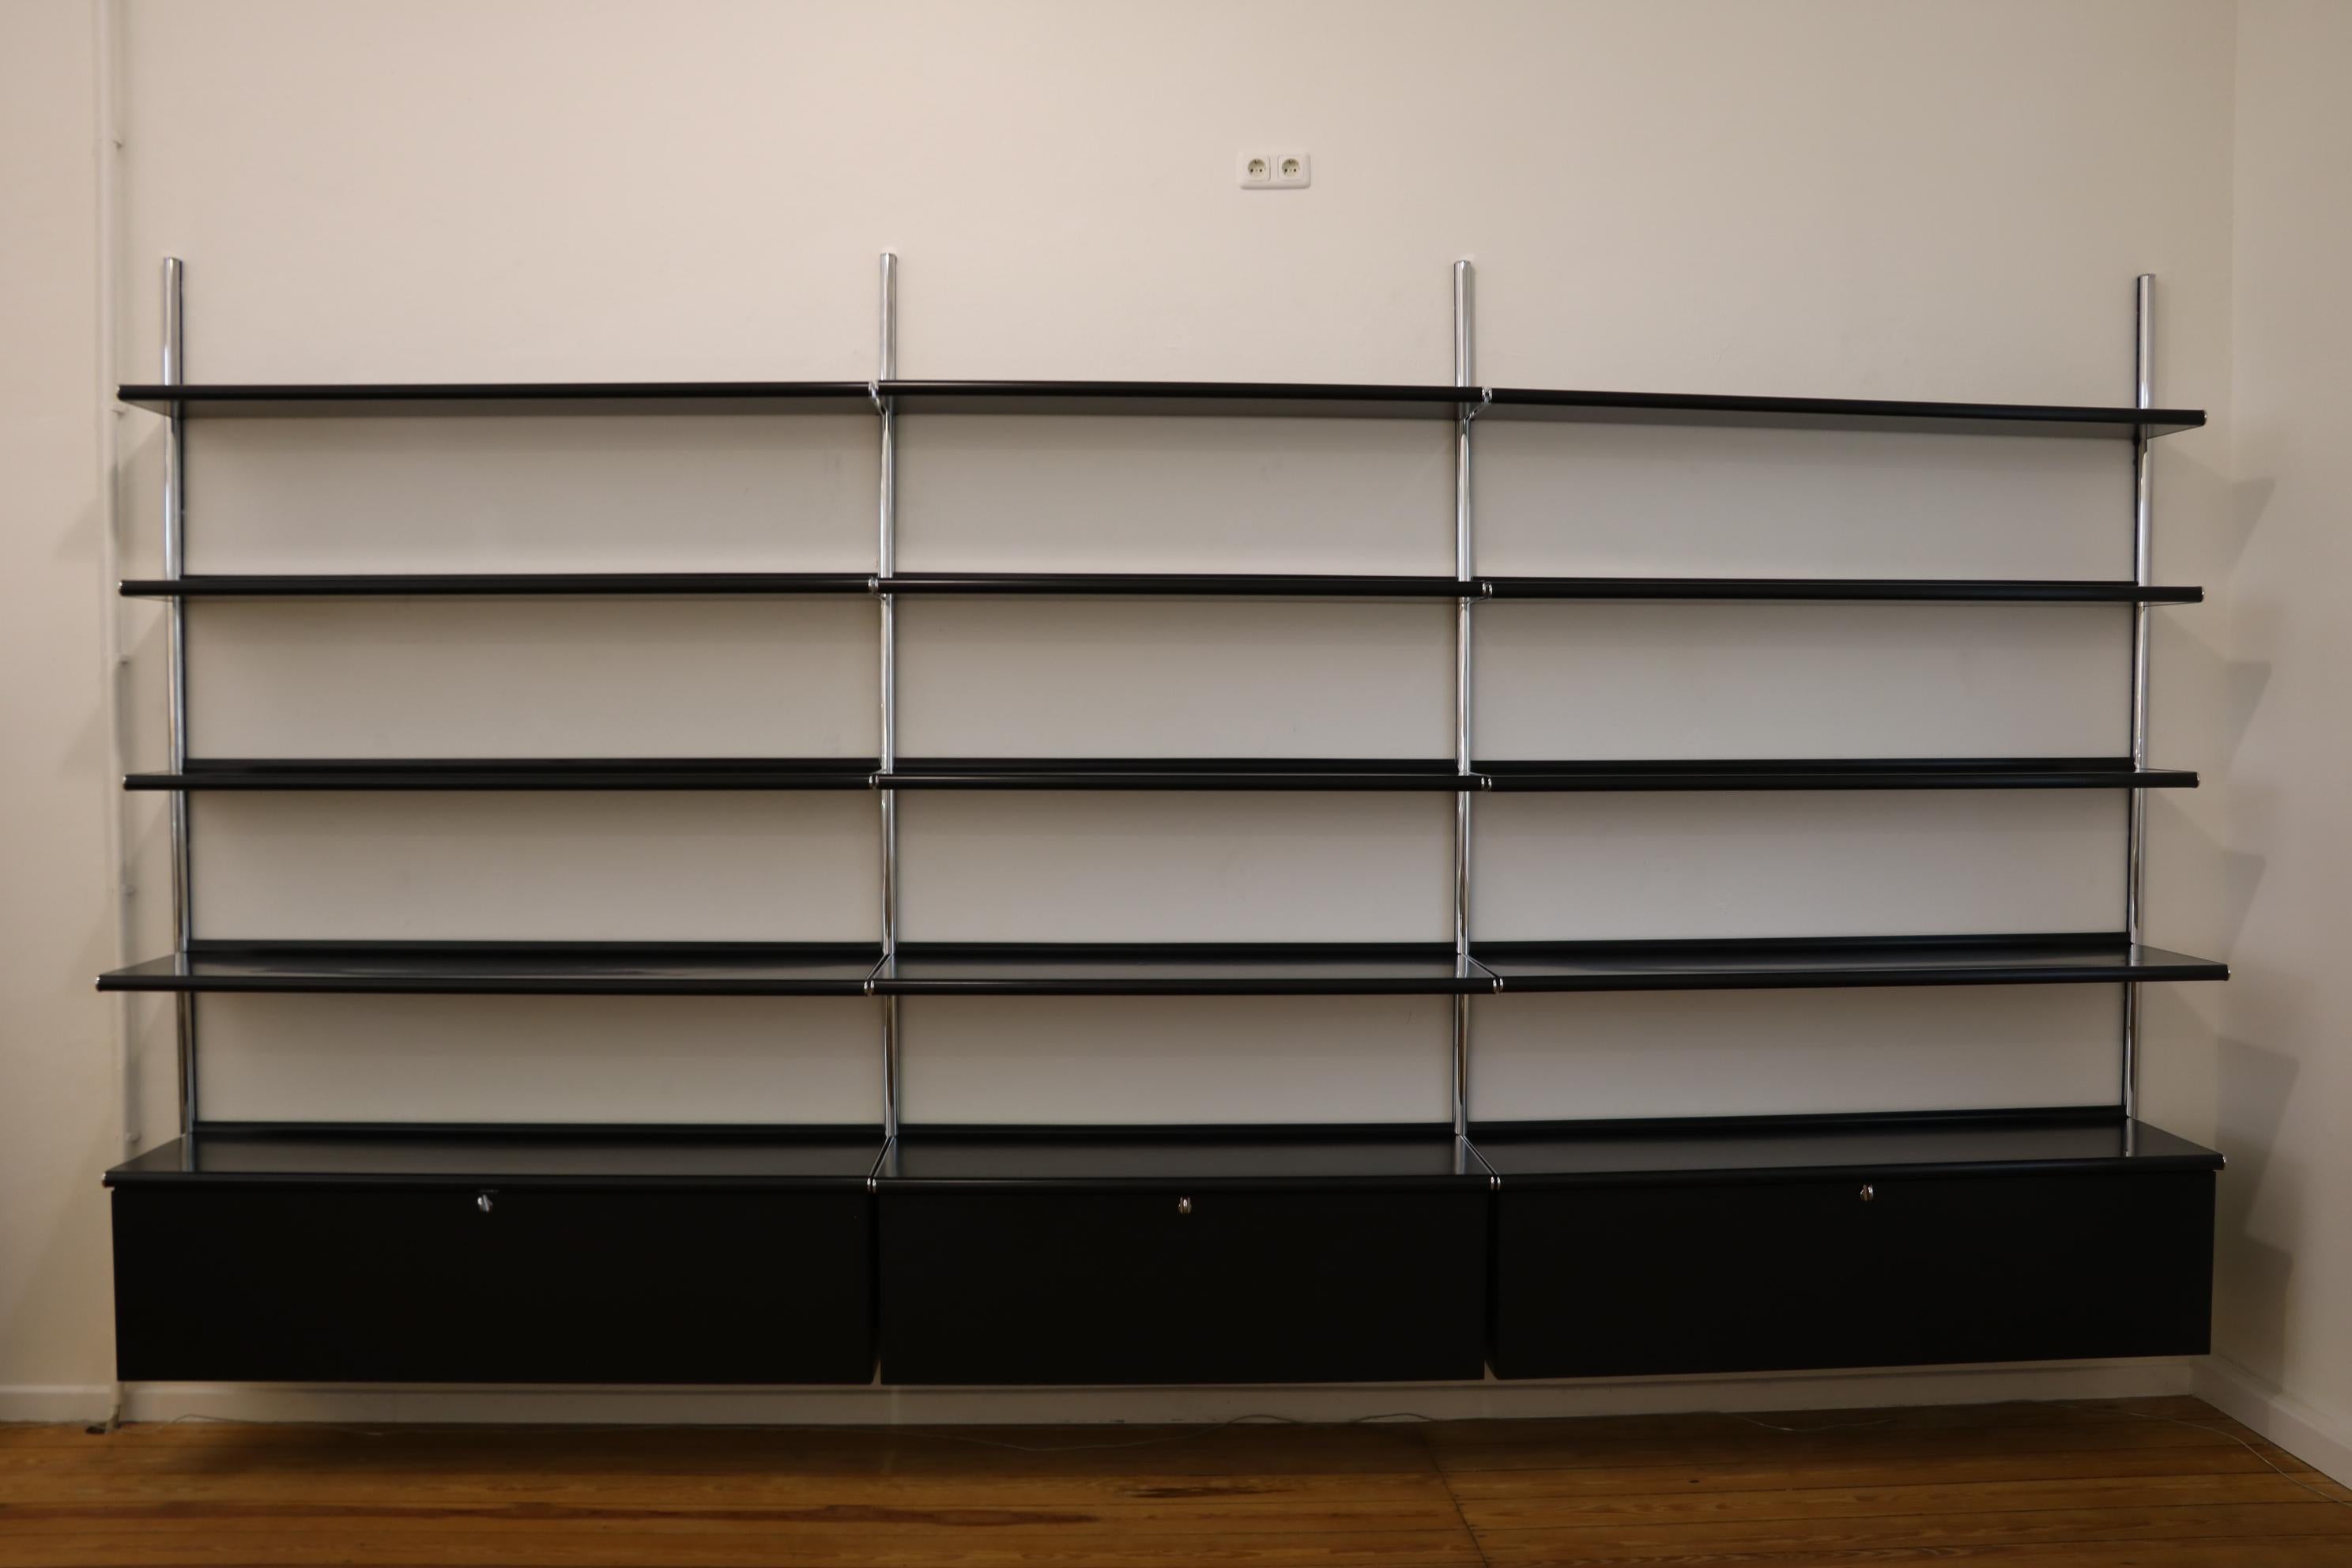 German Vitra Otto Zapf Shelf System 'Wingset' Office Management System For Sale